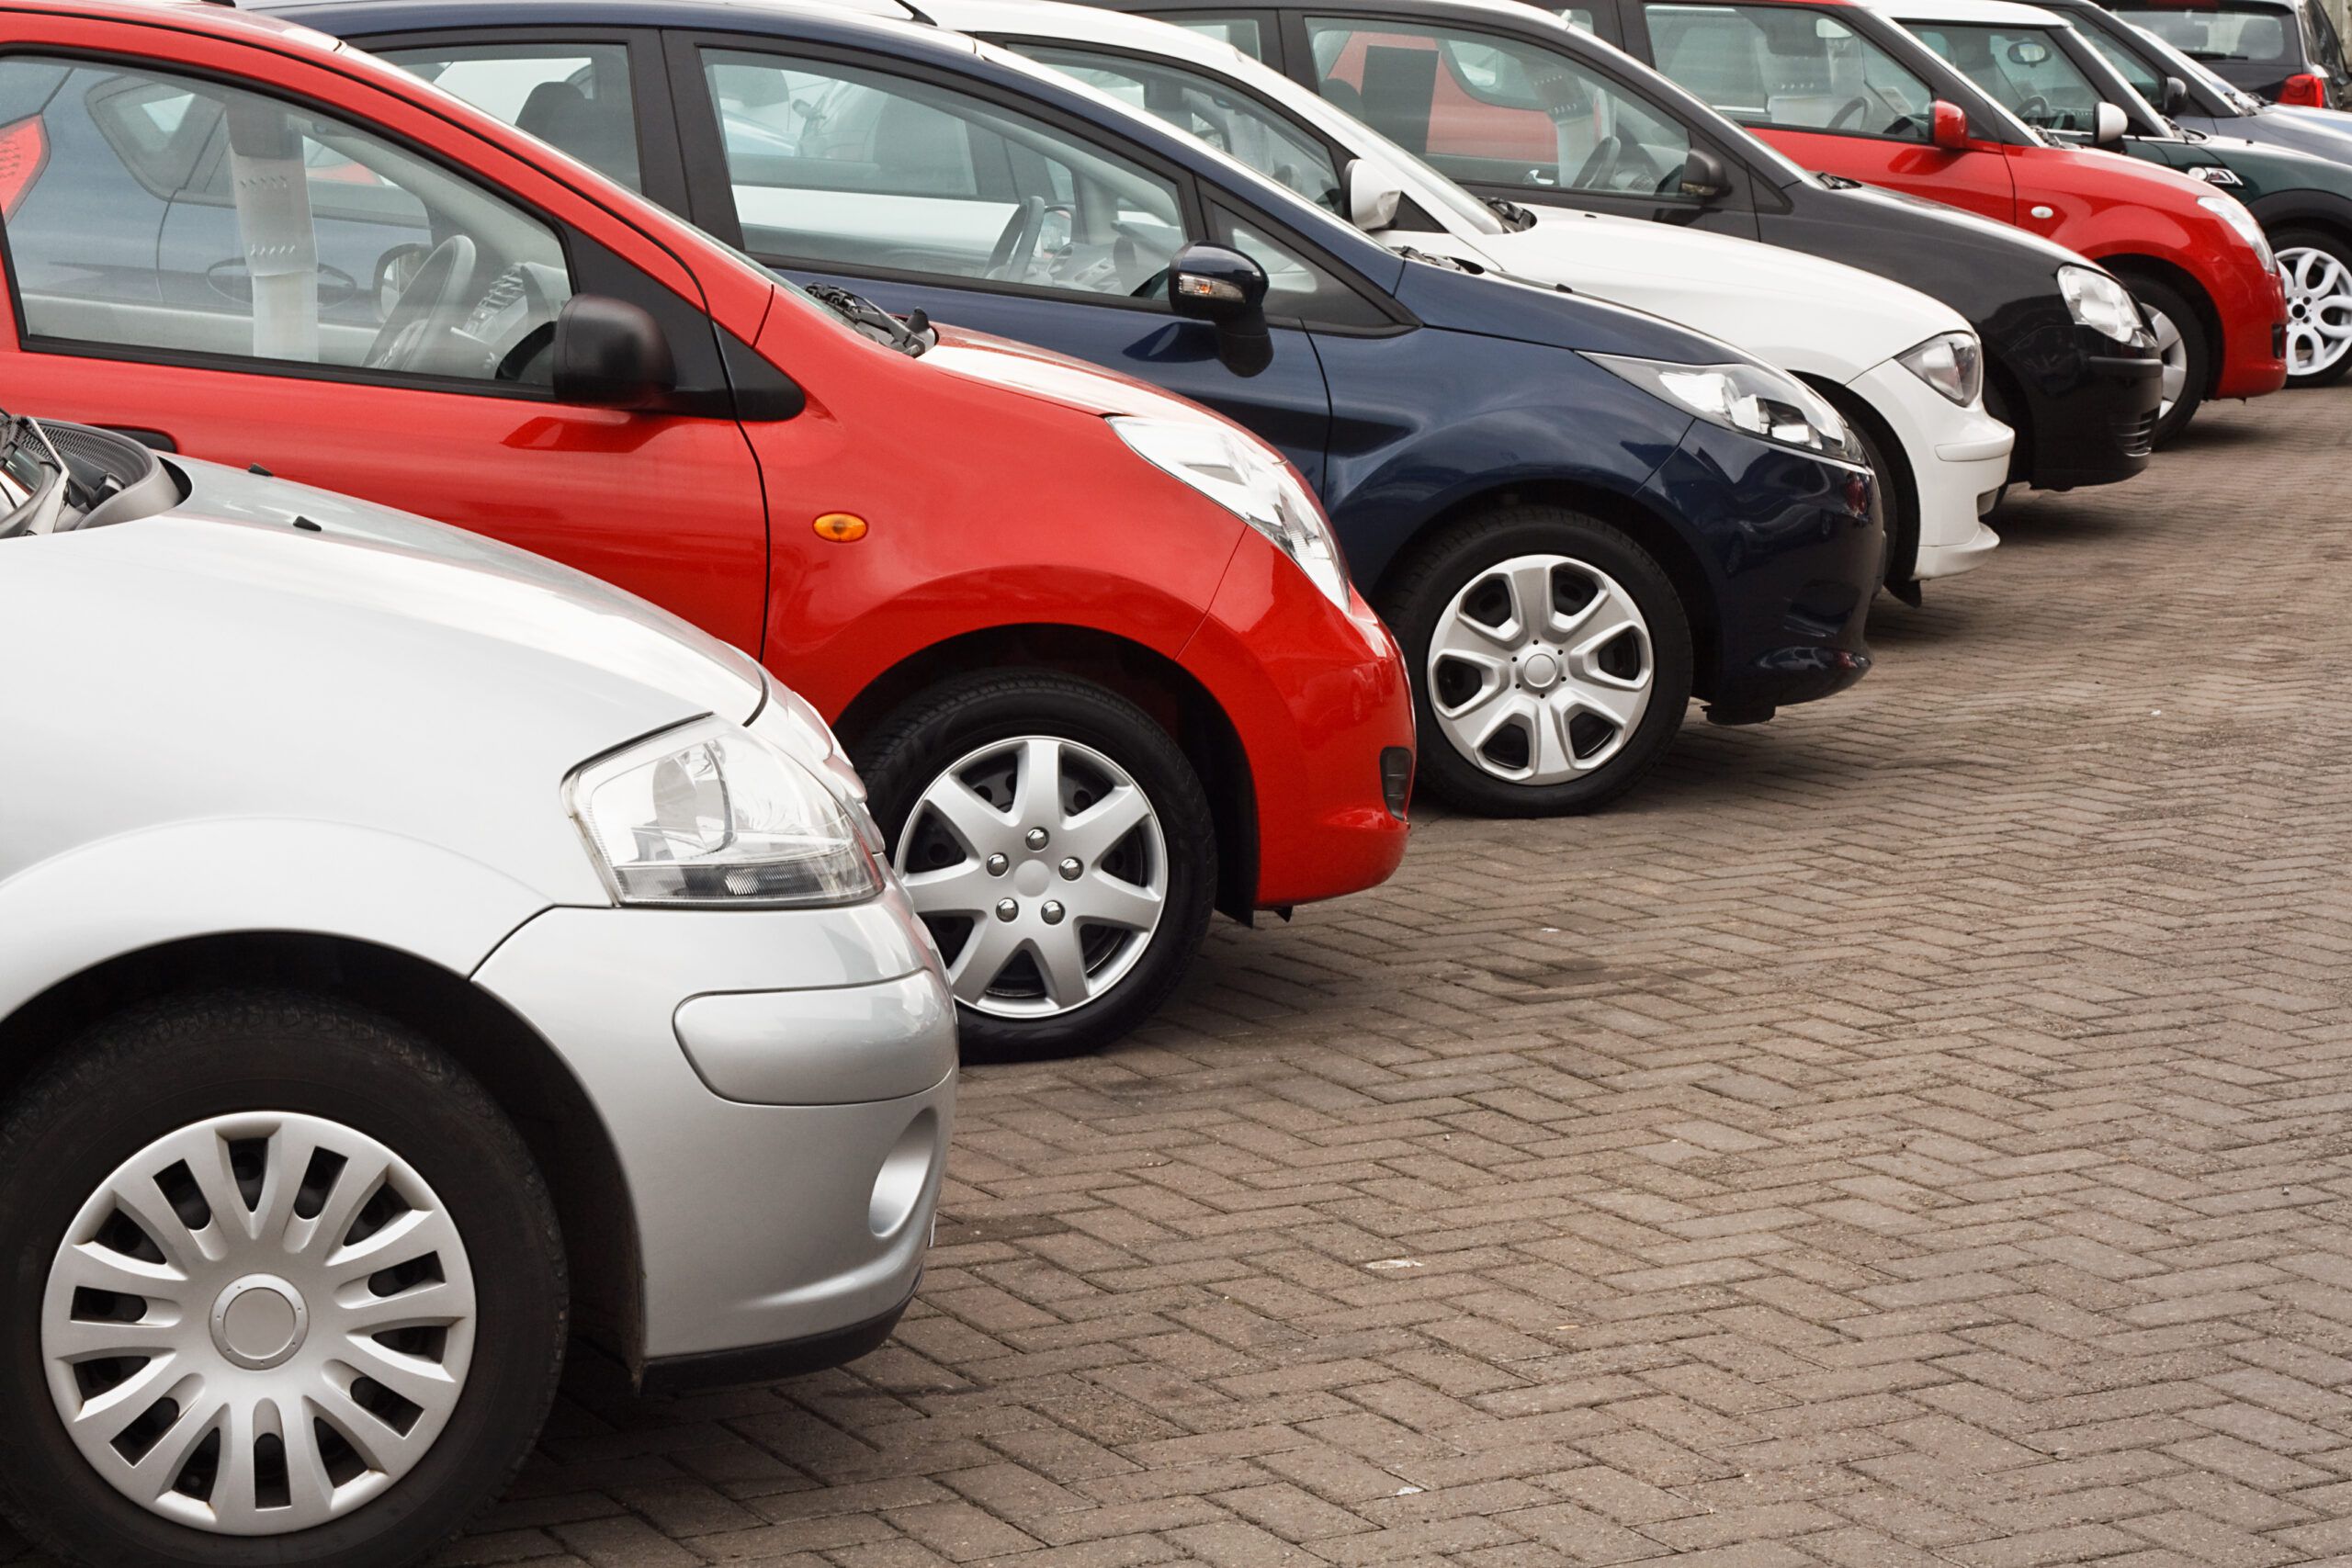 Ten Interesting Facts about Used Cars in Dubai